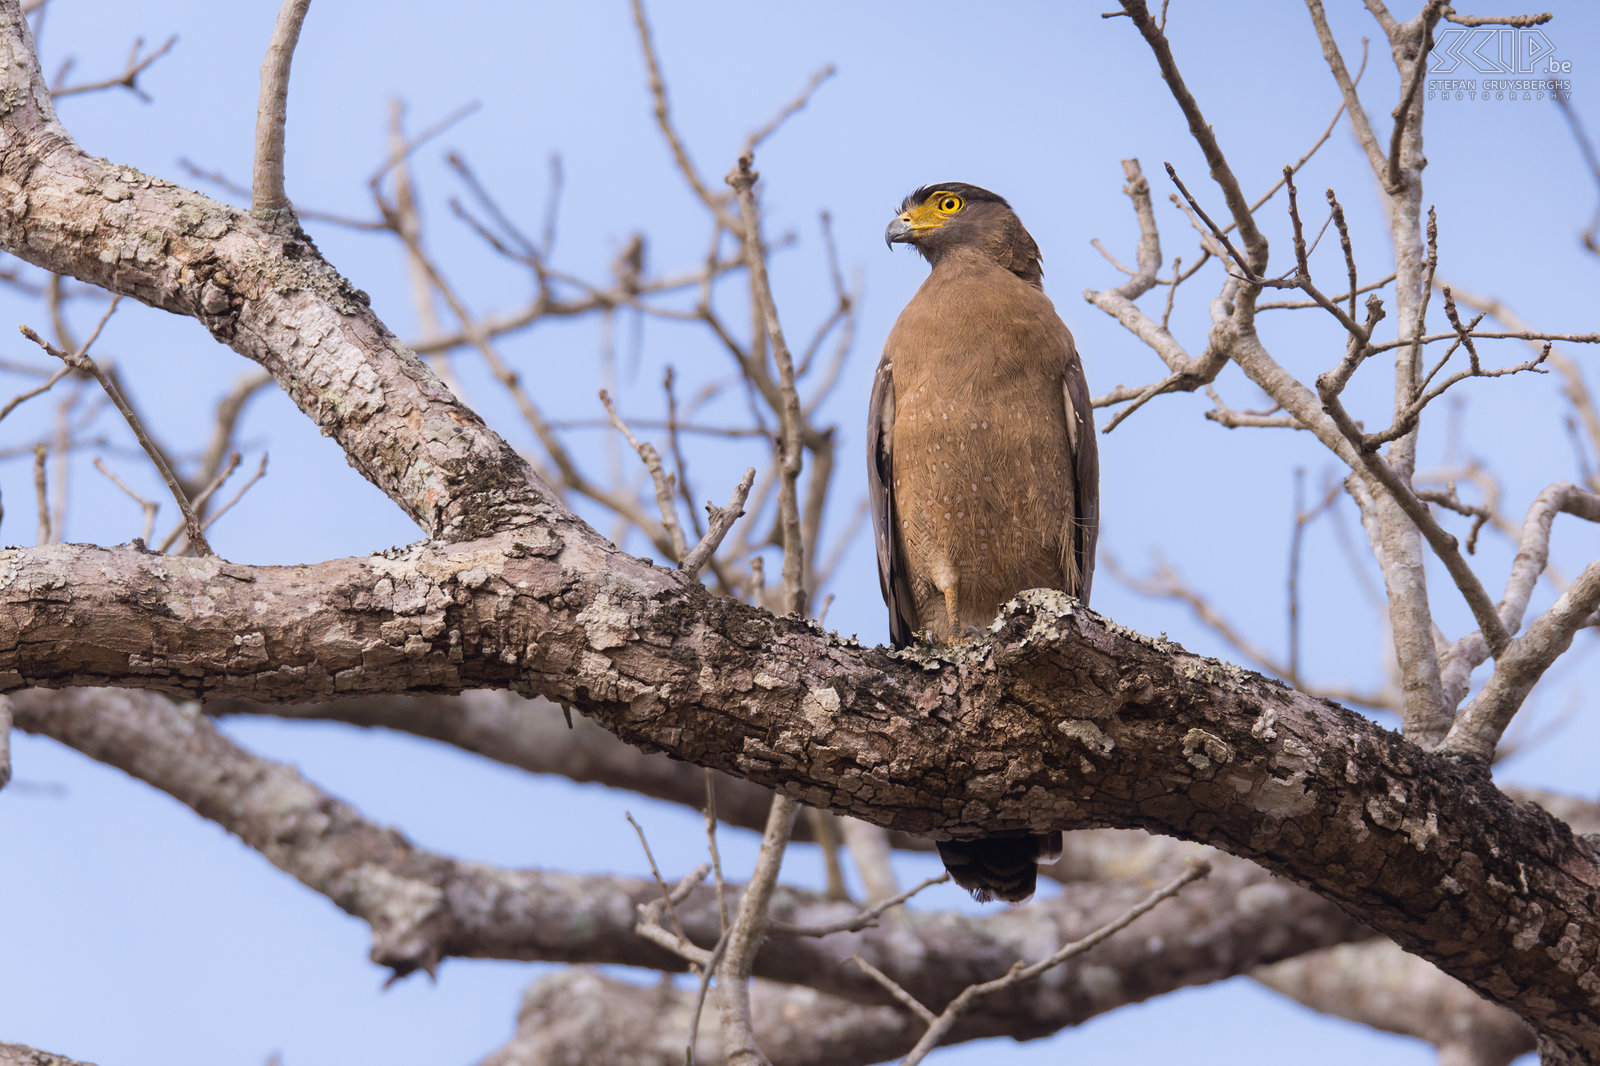 Kabini - Crested serpent eagle Crested serpent eagles (Spilornis cheela melanotis) are medium-sized raptors that are found in forested habitats across tropical Asia. They hunt for snakes and lizards. Stefan Cruysberghs